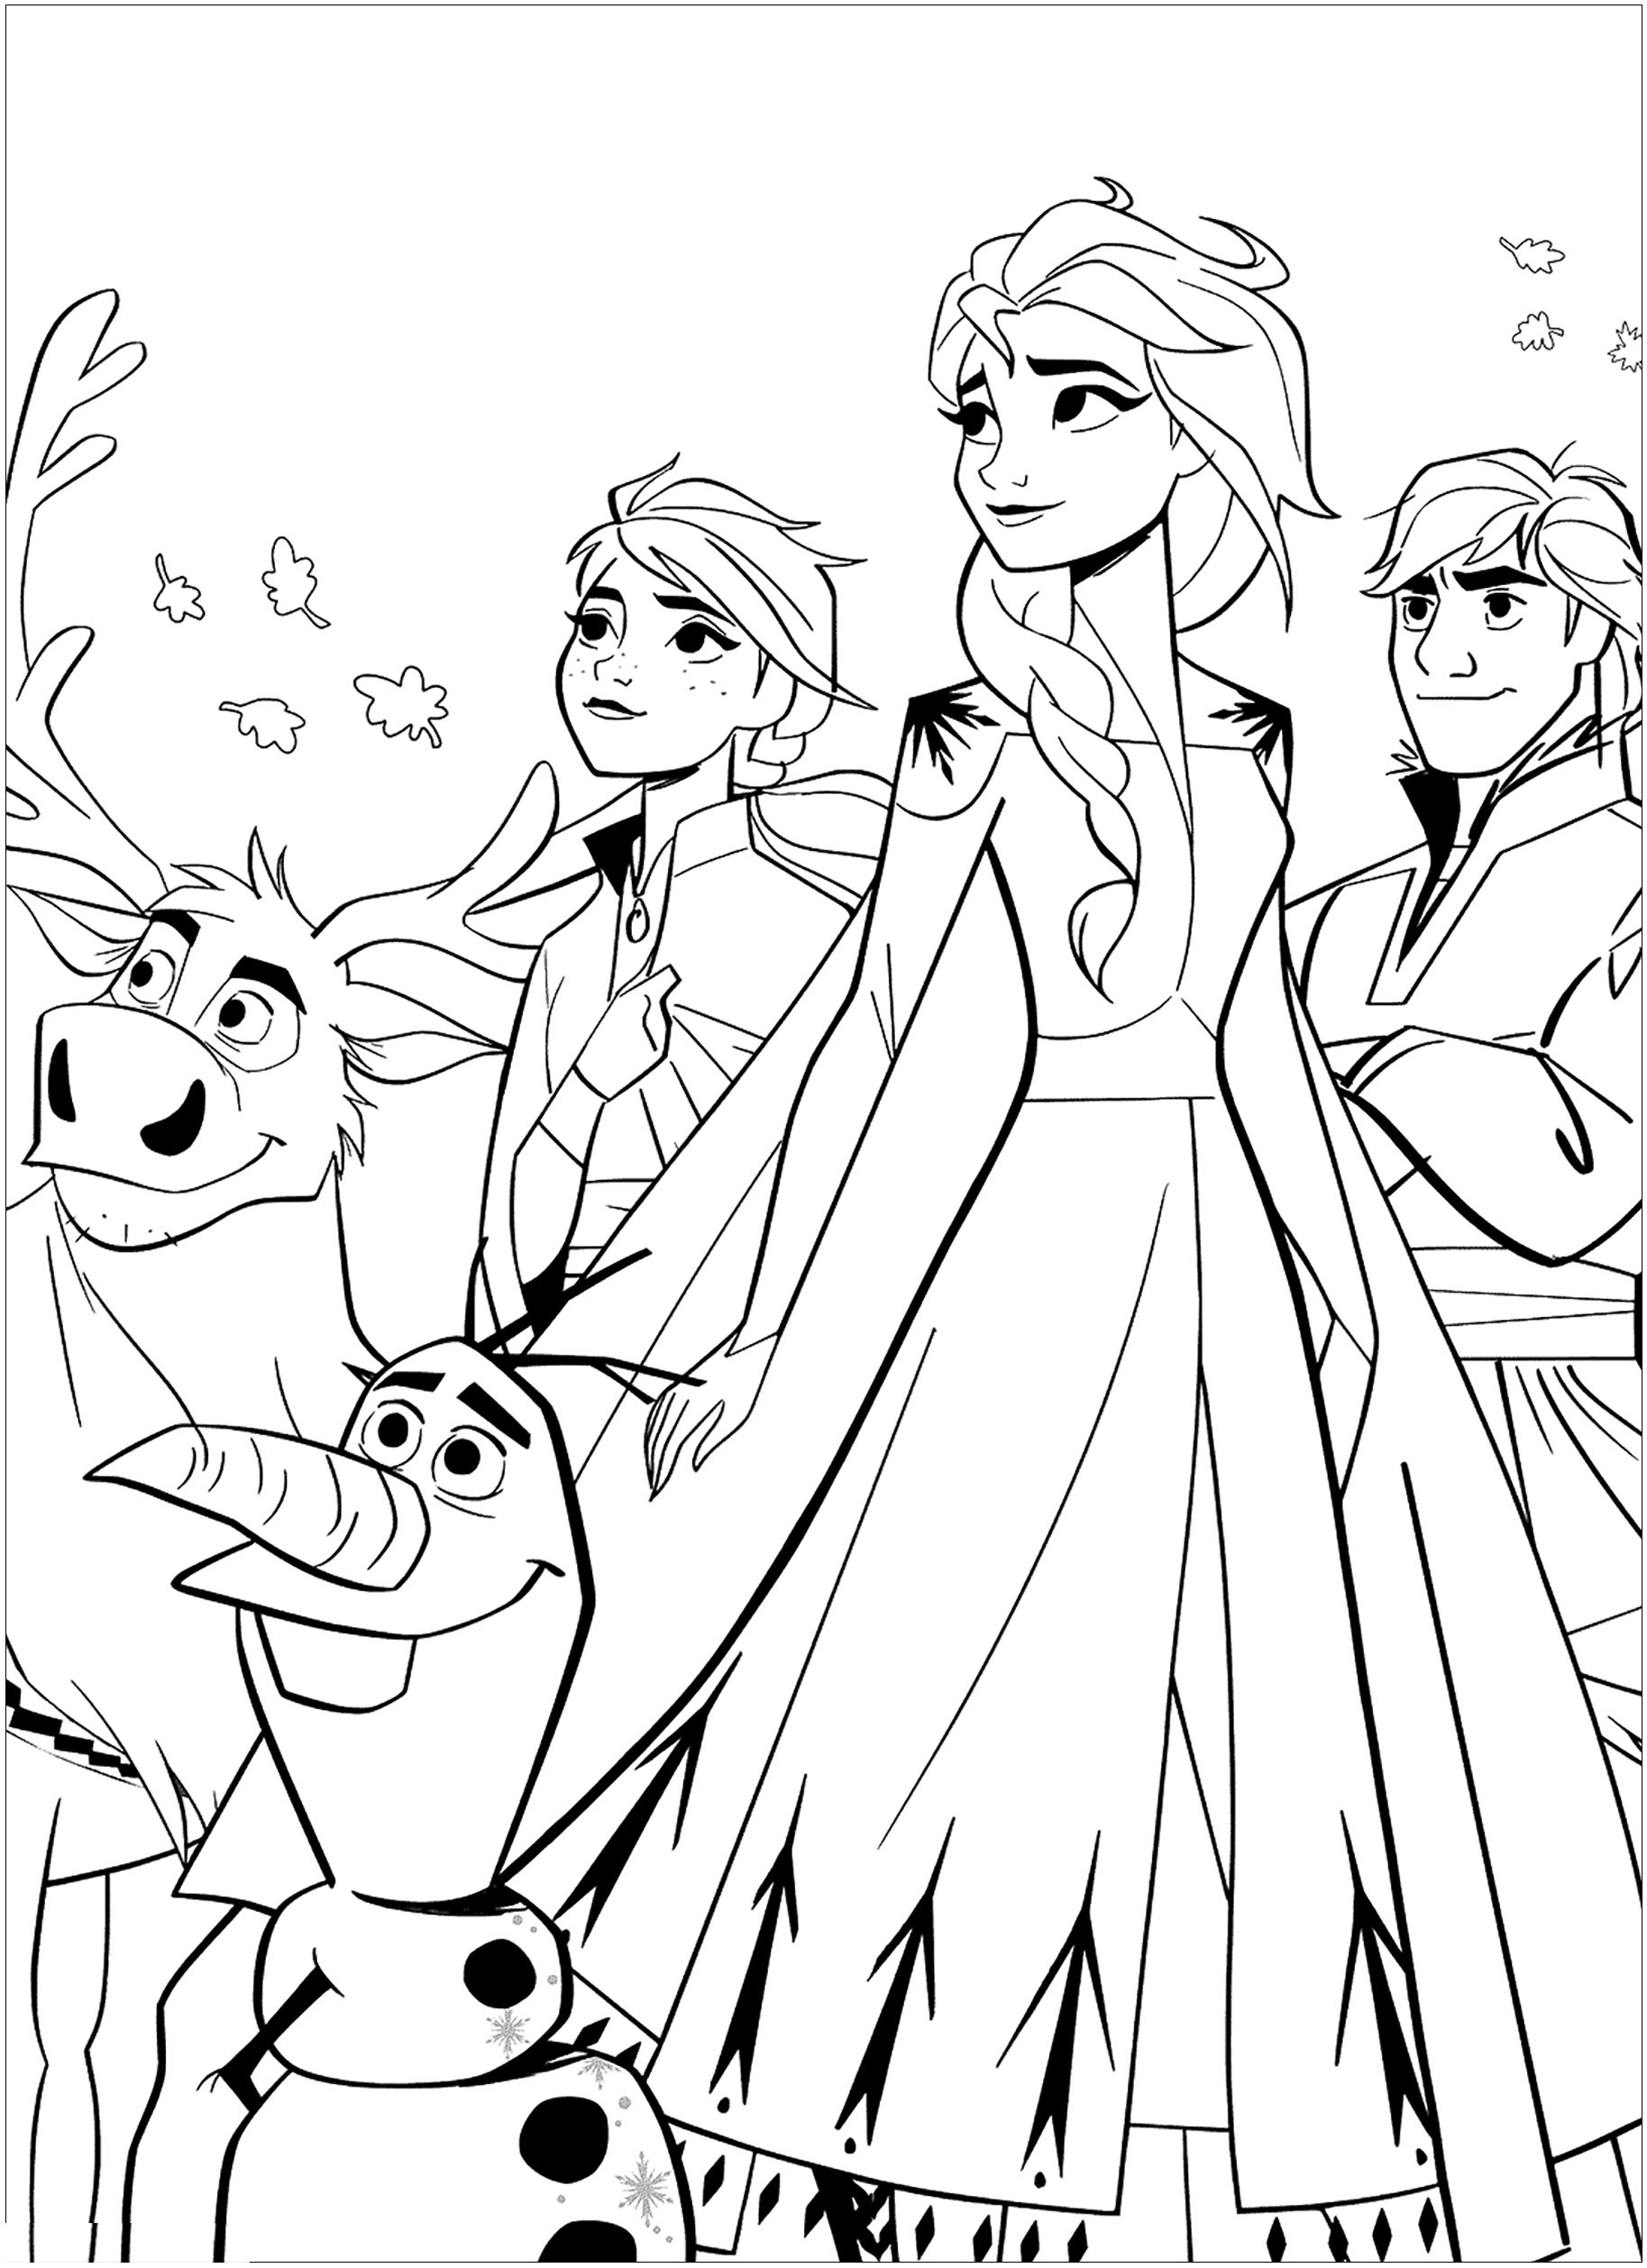 Find Olaf, Anna, Elsa, Sven and Kristoff in this nice coloring